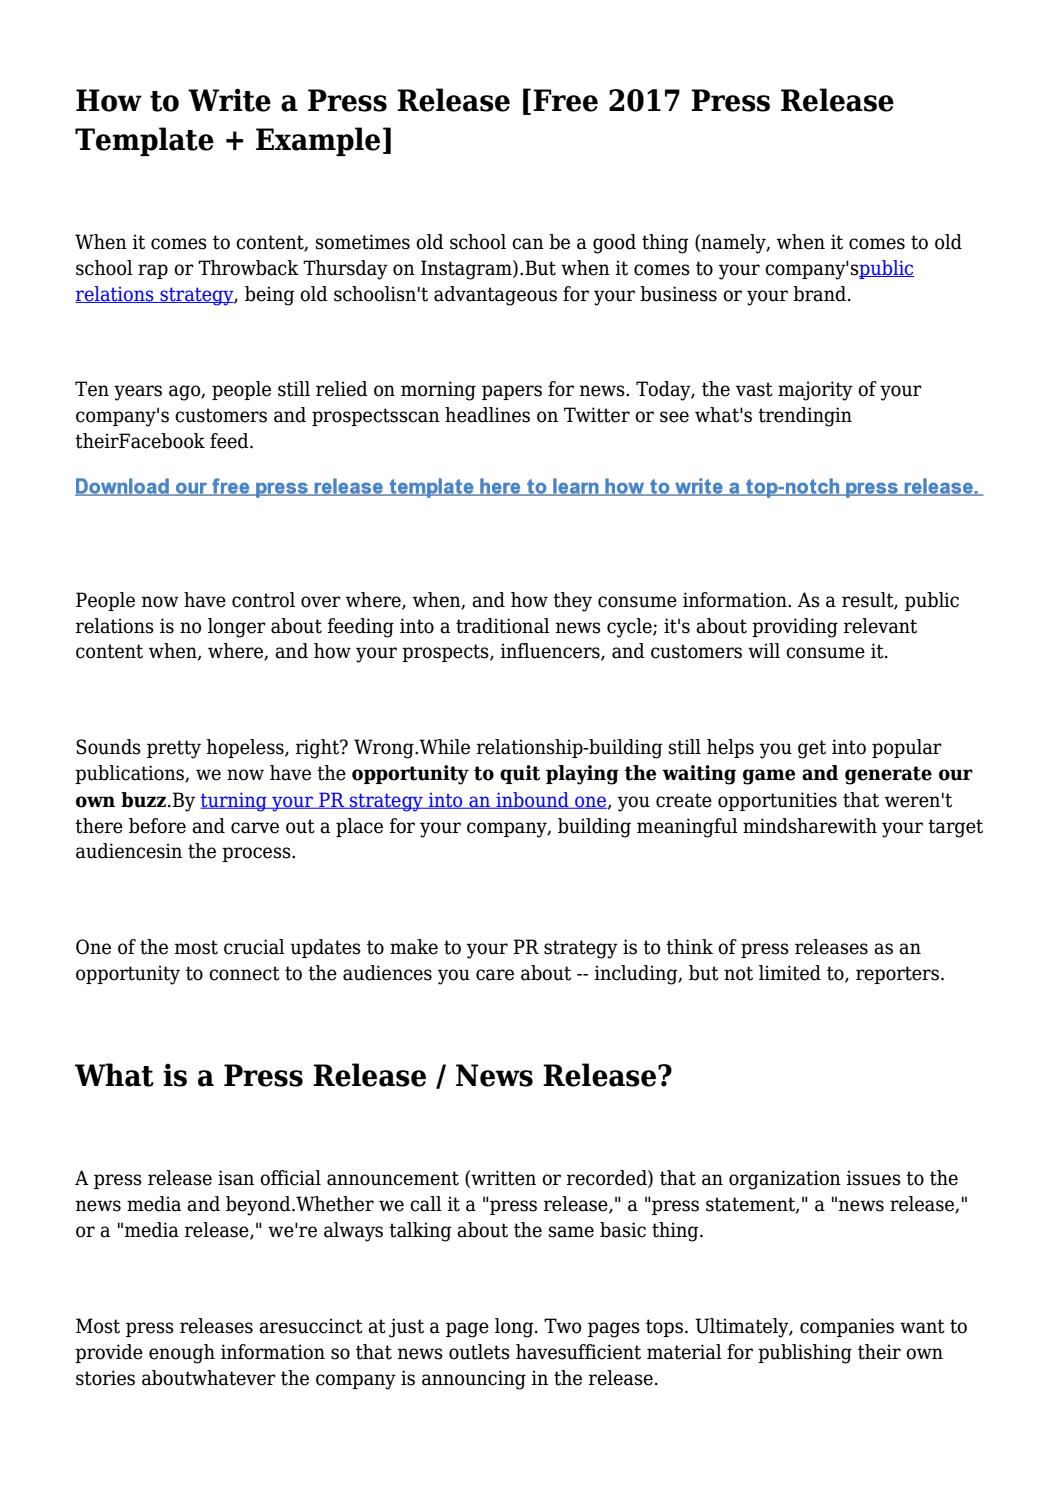 How to Write an Effective Press Release